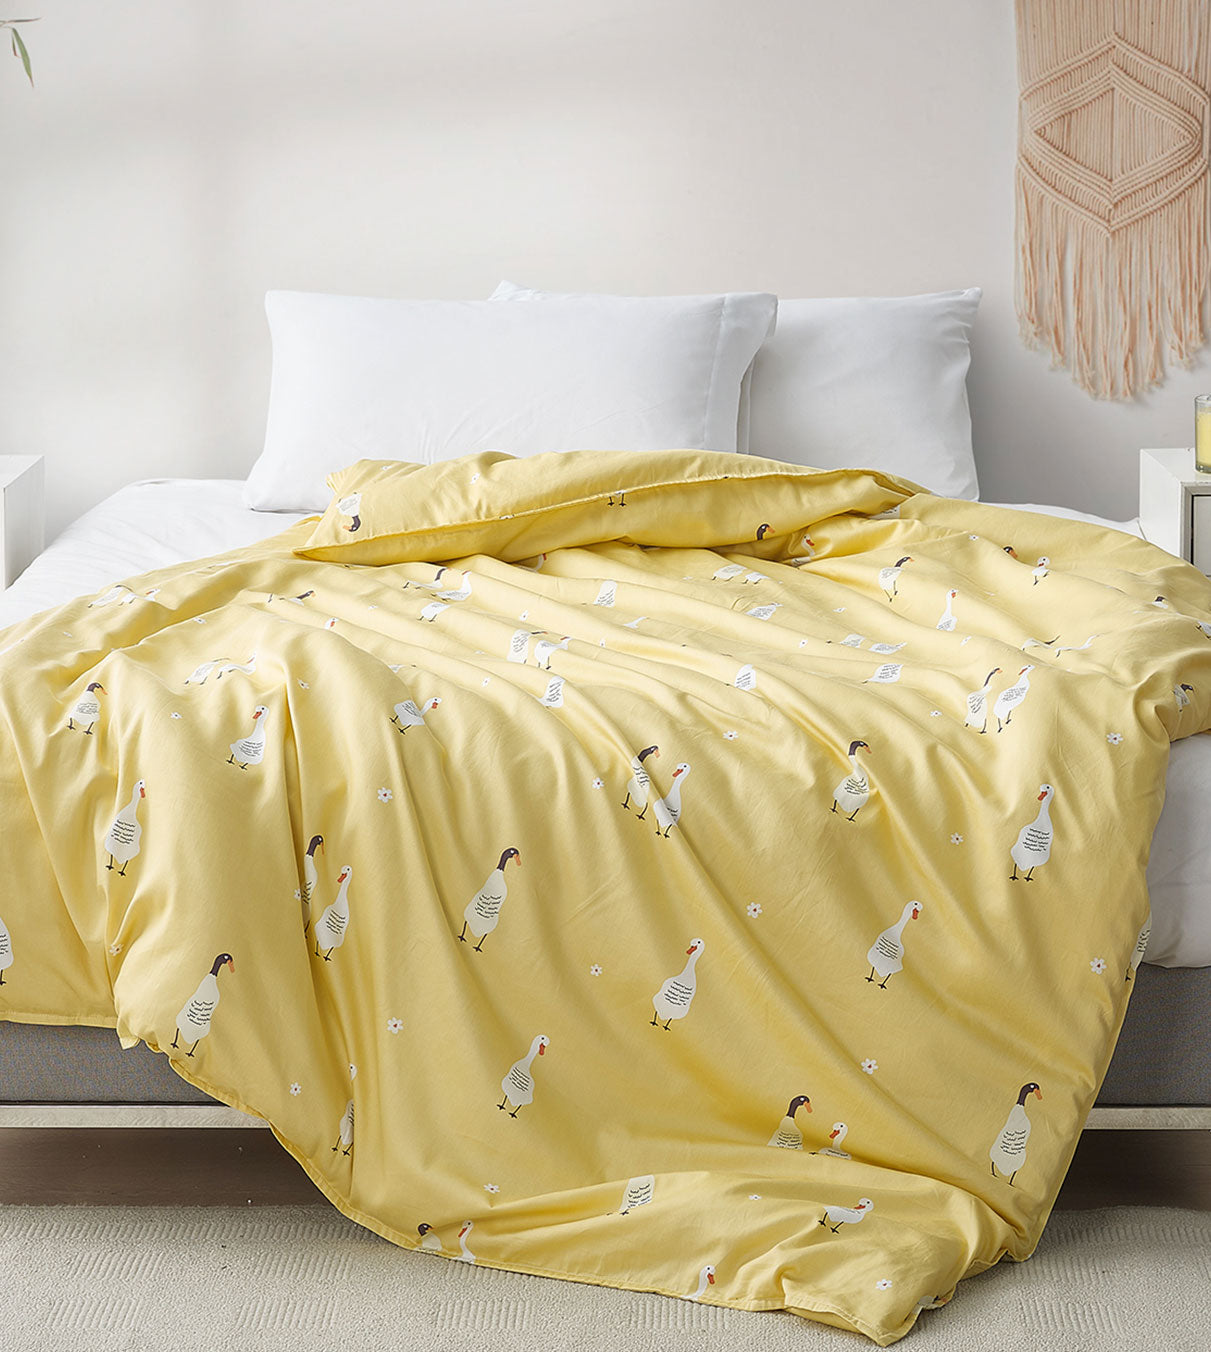 Product: Cotton Weighted Blanket Duvet Cover | Color: White Goose